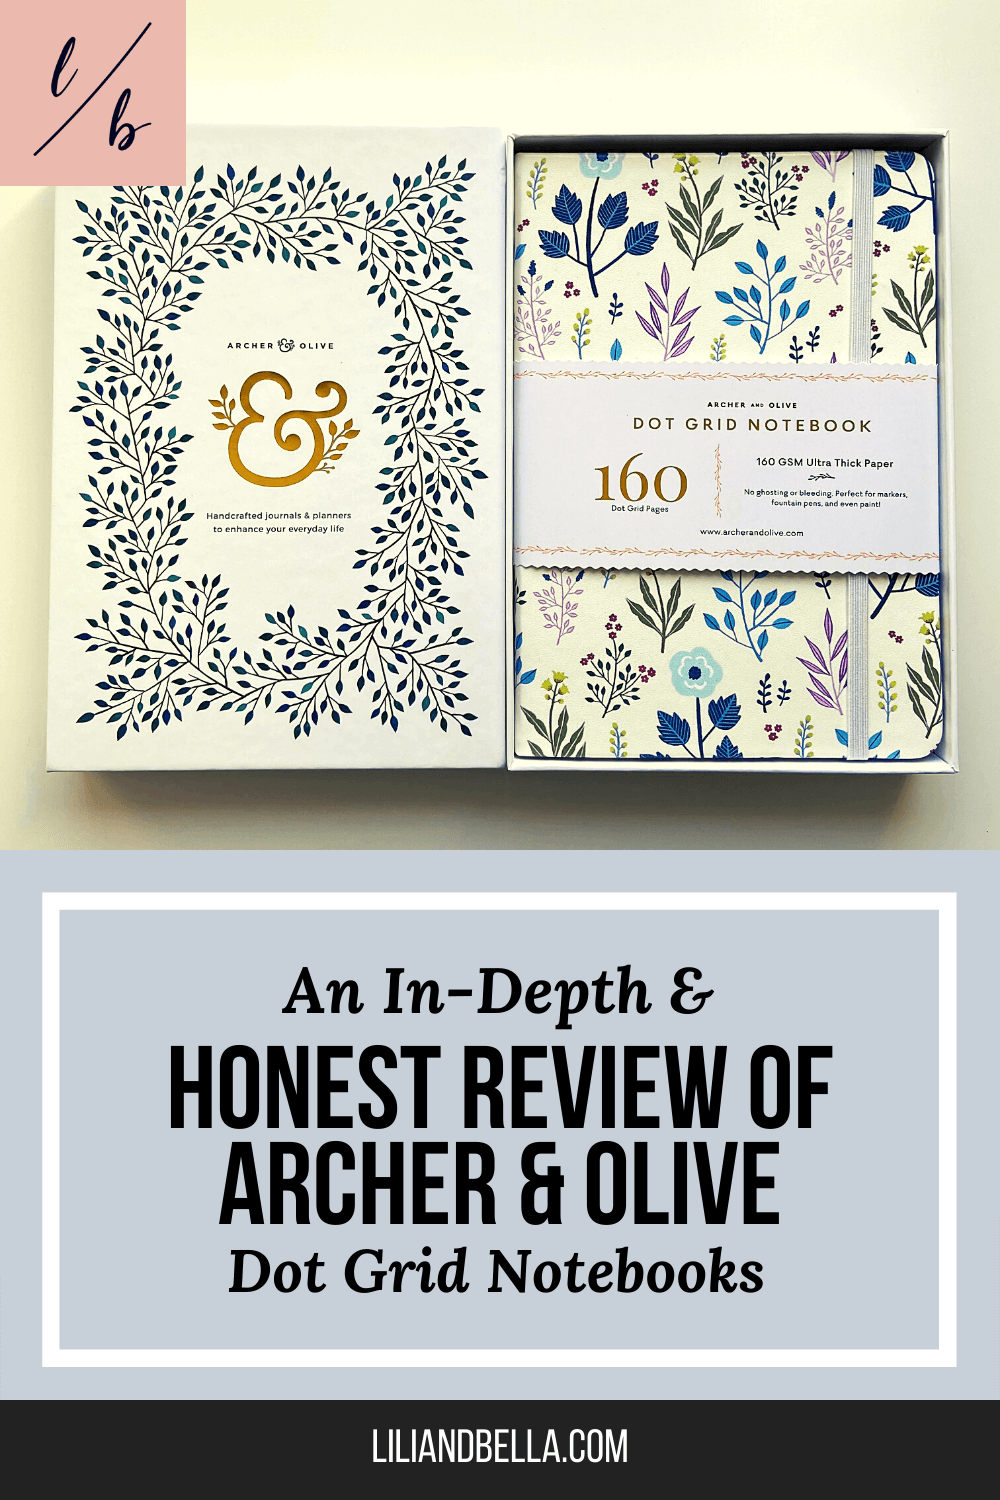 https://liliandbella.com/wp-content/uploads/2021/03/lili-and-bella-archer-and-olive-notebooks-review.png